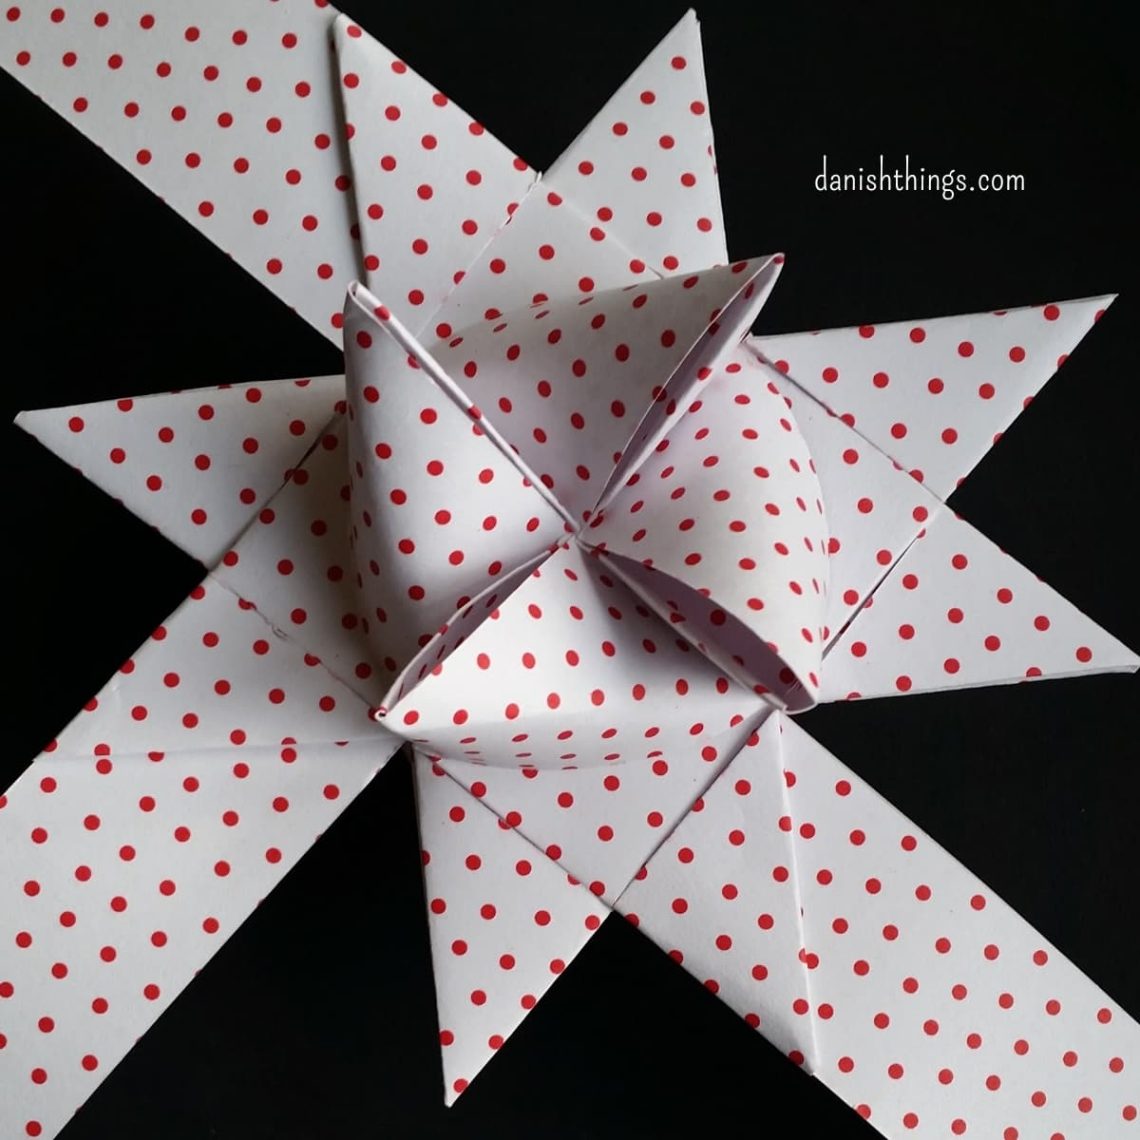 How to make a Froebel star - a classic Danish Christmas decoration. A Christmas star - step-by-step guide. Whether you weave or fold paper stars, if you are a beginner or experienced, you will get help with text, photos, and videos for every step. Find recipes, step-by-step guides, free print, and inspiration for this time of year at danishthings.com © Christel Parby - Danish Things #DanishThings #froebelstar #frobelstern #paperstar #paper #star #howto #howtoguide #danish #christmas #decoration #homemade #decoration #danishchristmas #danishstar #adventstar #advent #nordic #german #christmasstar 